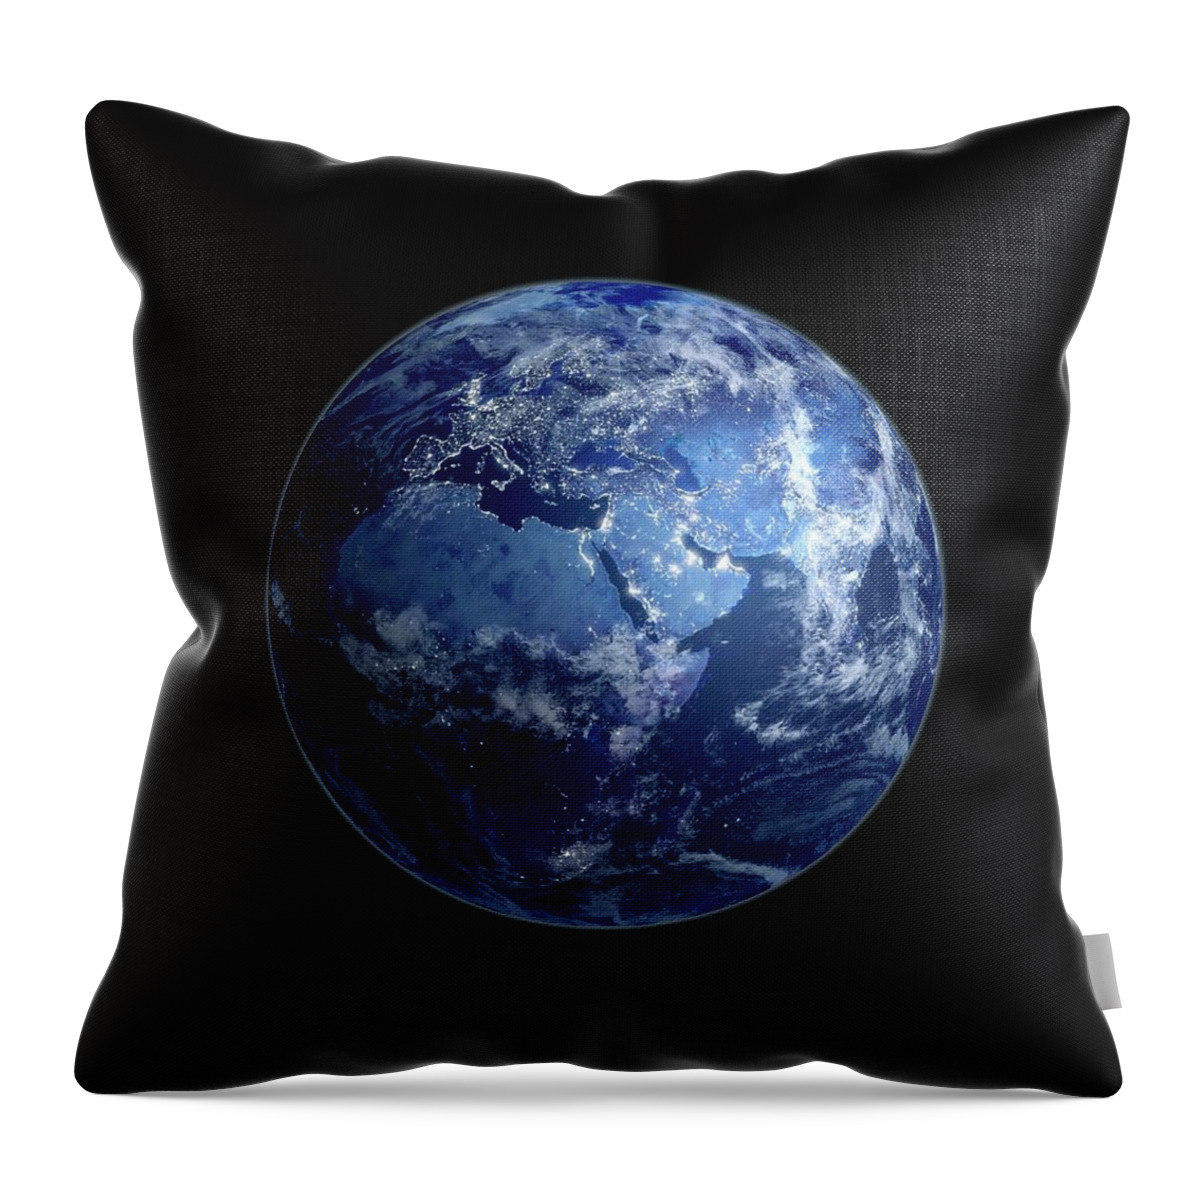 Globe Throw Pillow featuring the digital art Earth At Night, Artwork by Science Photo Library - Andrzej Wojcicki